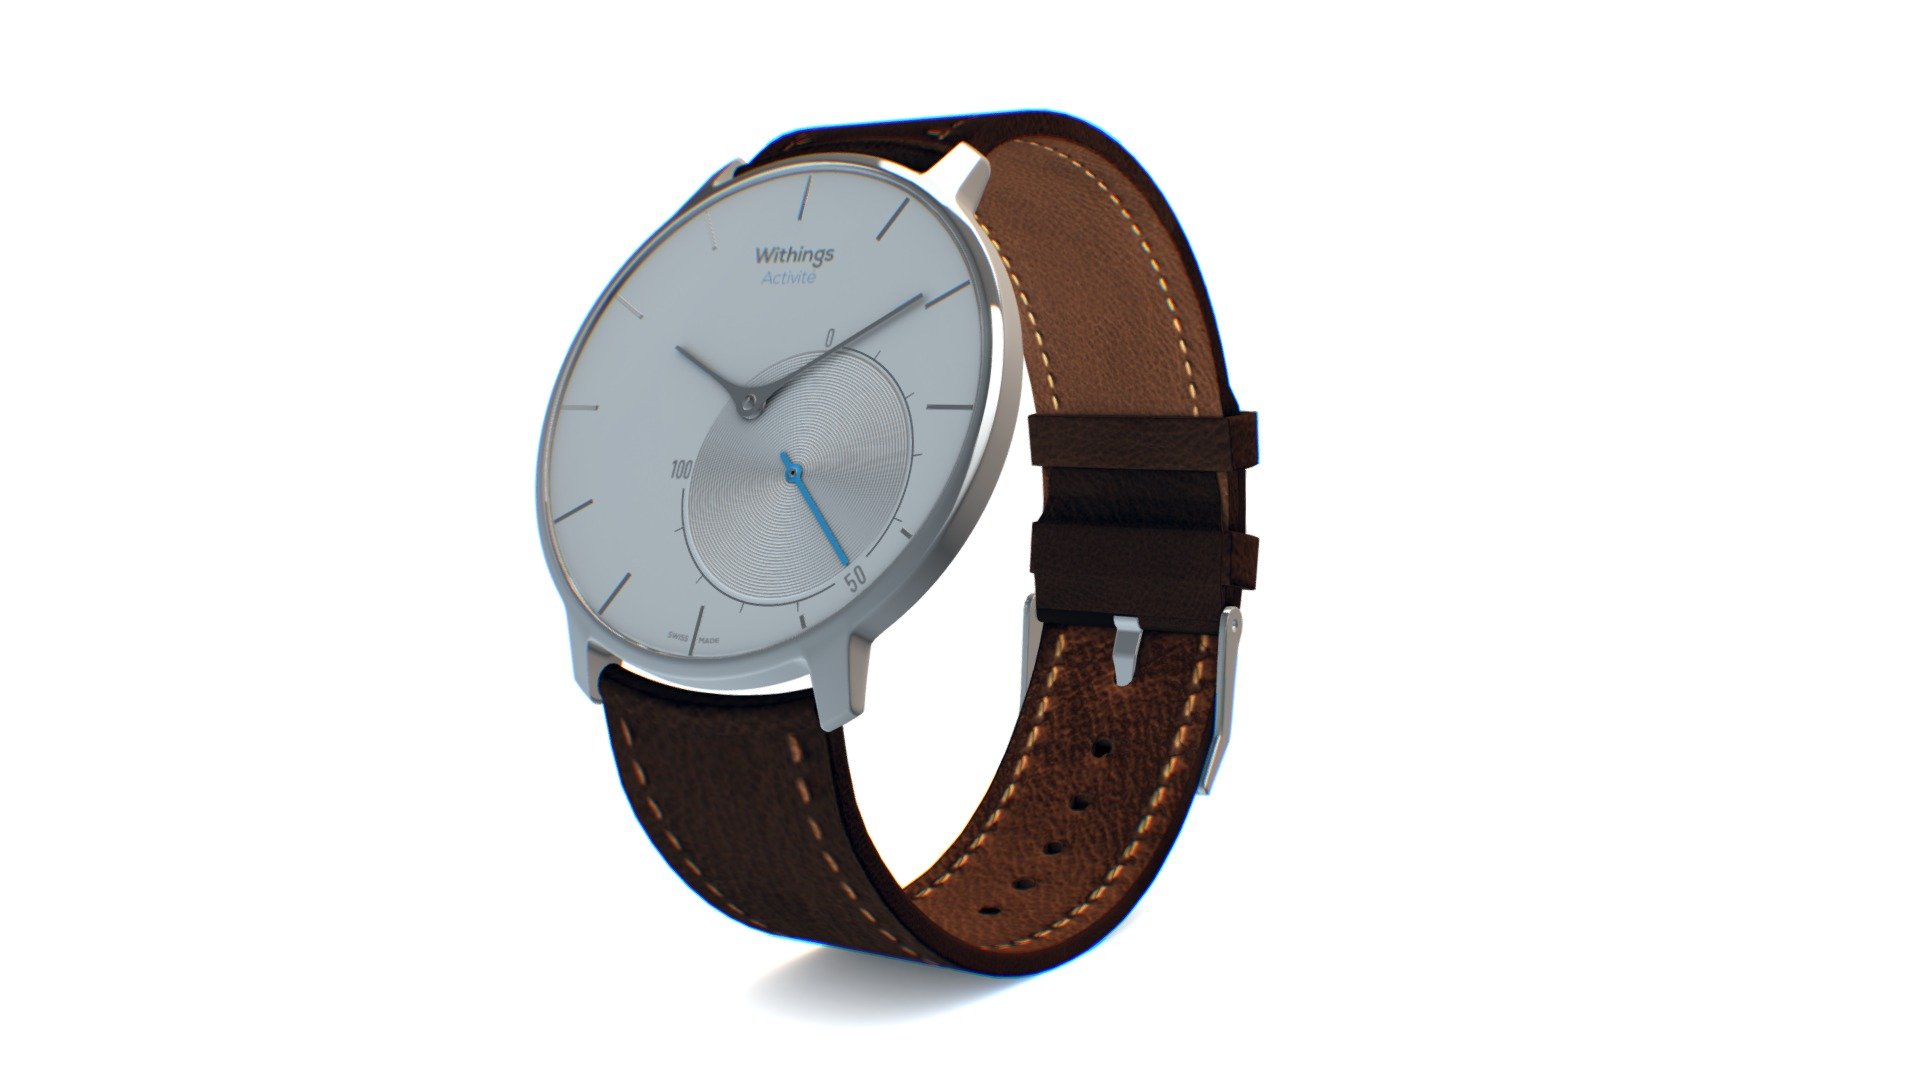 A new generation Swiss-Made watch combining time and activity tracking. Withings Activité is a unique tool to inspire and empower a healthy lifestyle. Model by /xelus - Withings Activité Watch - 3D model by Virtual Studio (@virtualstudio) 3d model